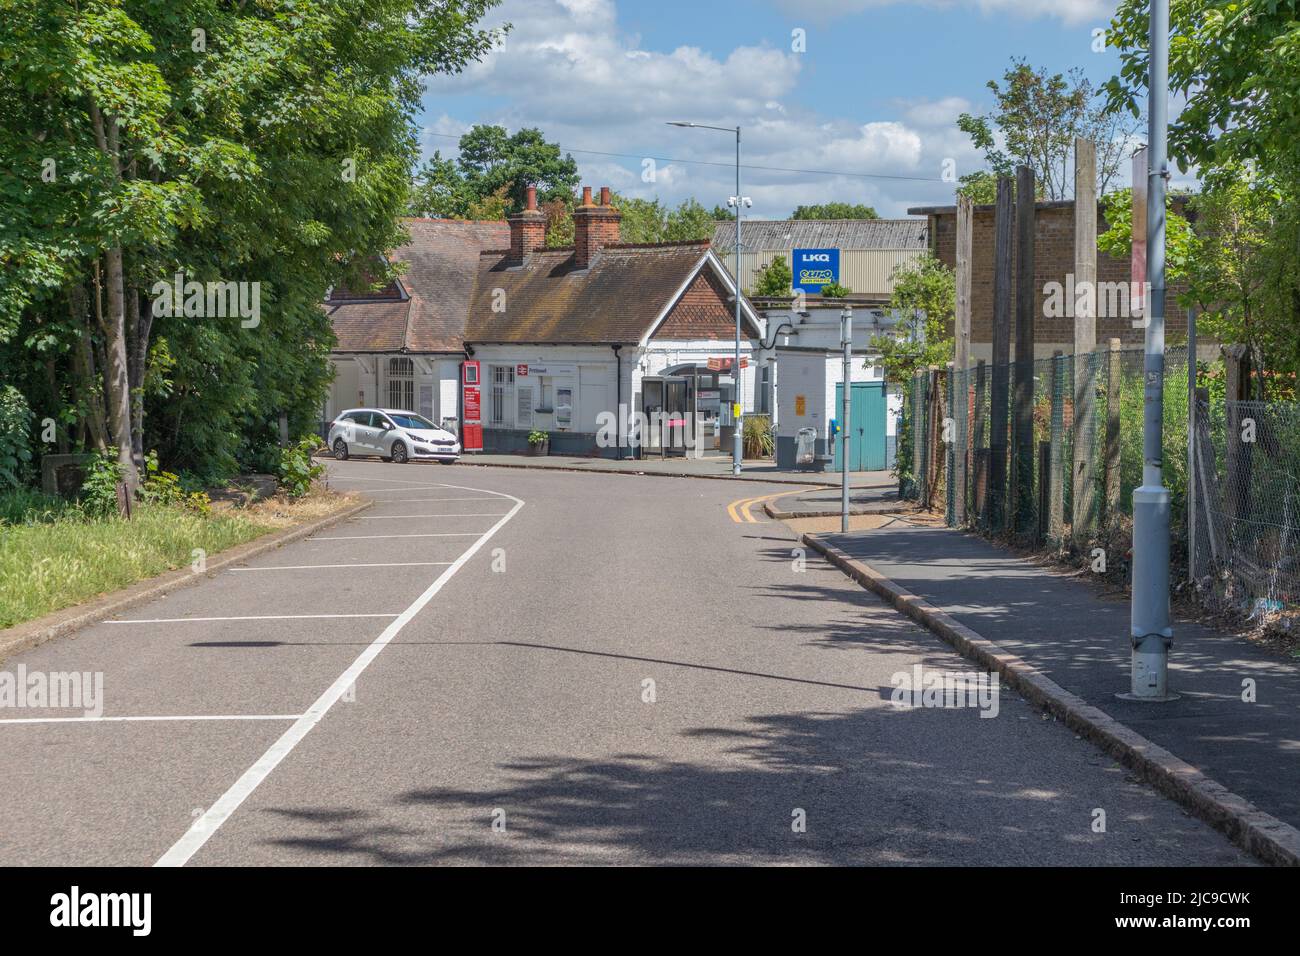 Southend on Sea, UK. 11th Jun, 2022. Station Approach, Prittlewell. Scenes near Prittlewell Station, Southend on Sea, the area Simon Dobbin was left with permanent brain damage following an assault after a Southend Utd vs Cambridge Utd match on 21st March, 2015. Mr Dobbin died on 21st October, 2020. He was 48 years old. Earlier in the week, 10th June 2022, Essex Police arrested five men in connection with the assault. Penelope Barritt/Alamy Live News Stock Photo